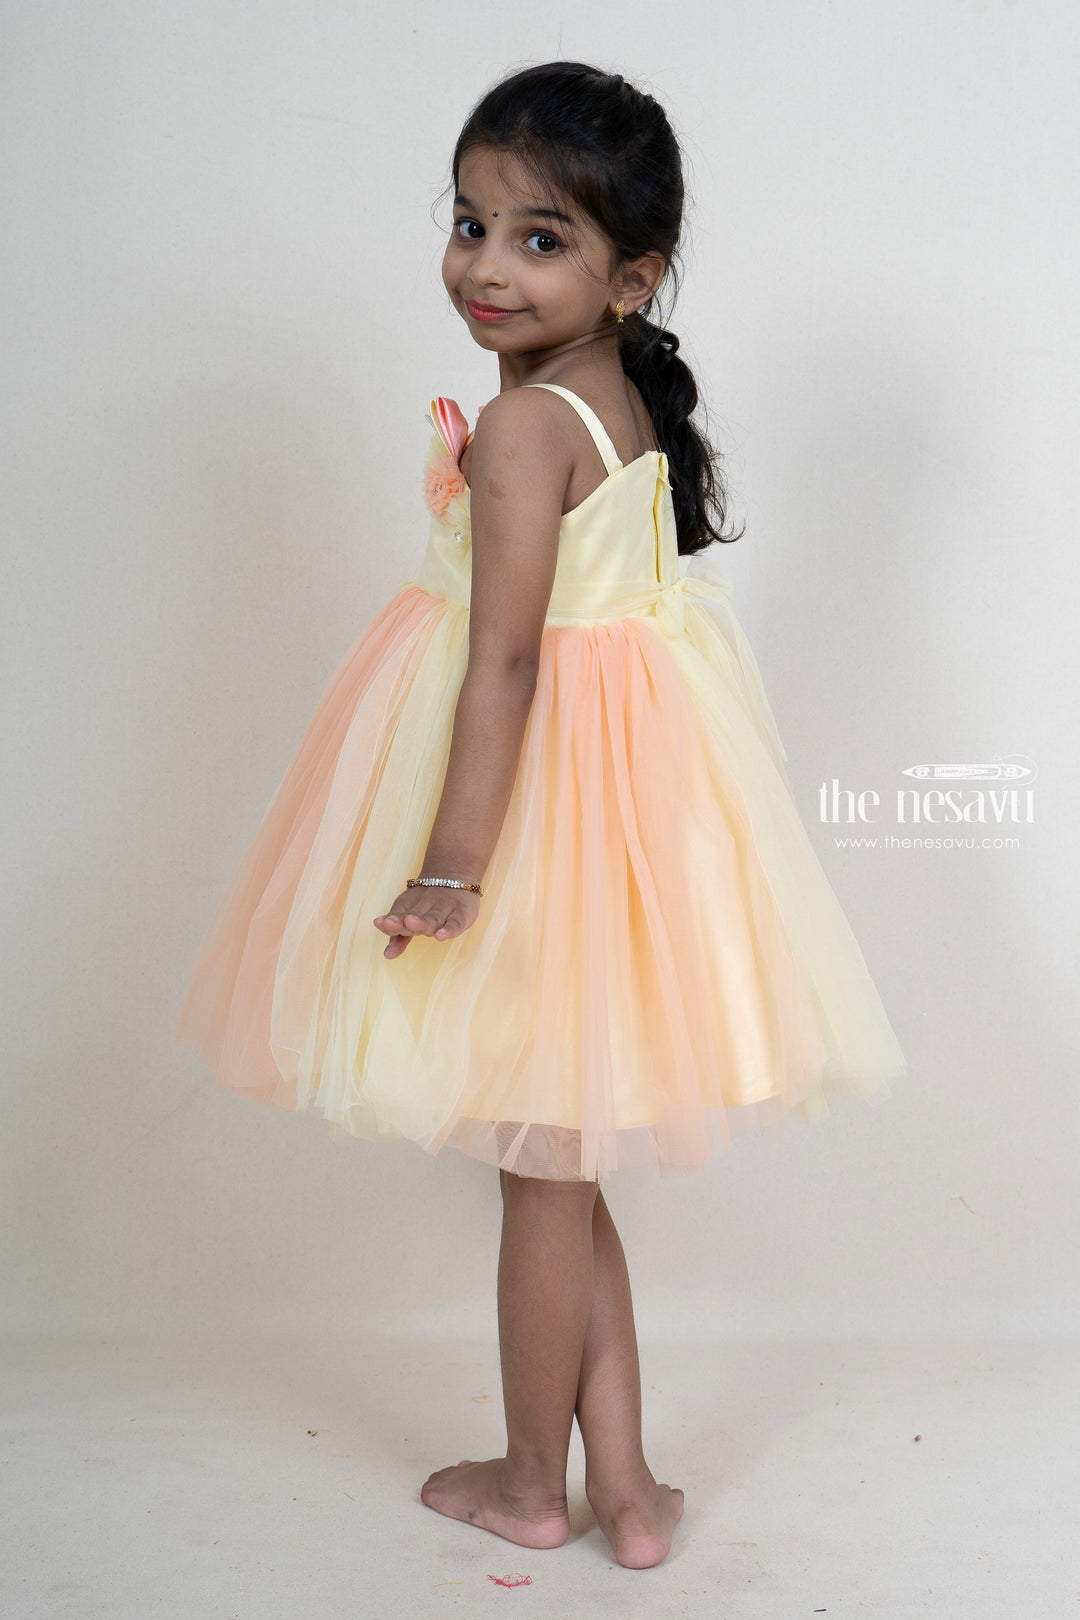 The Nesavu Party Frock Orange With Pink Pretty Party Wear For Girls With Floral Trims psr silks Nesavu